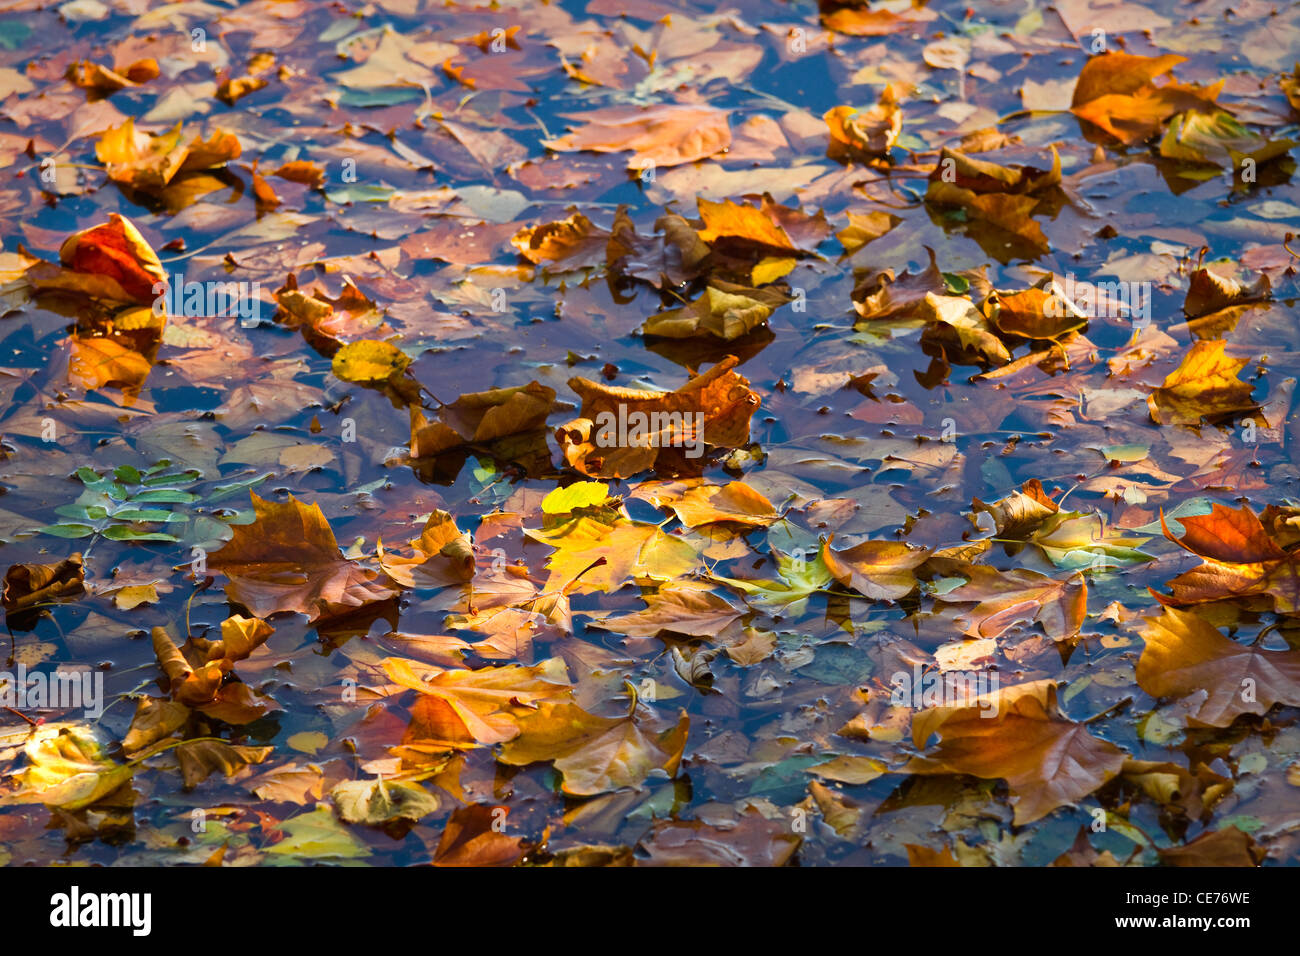 Sun and shadow on fallen autumn leaves floating on water Stock Photo